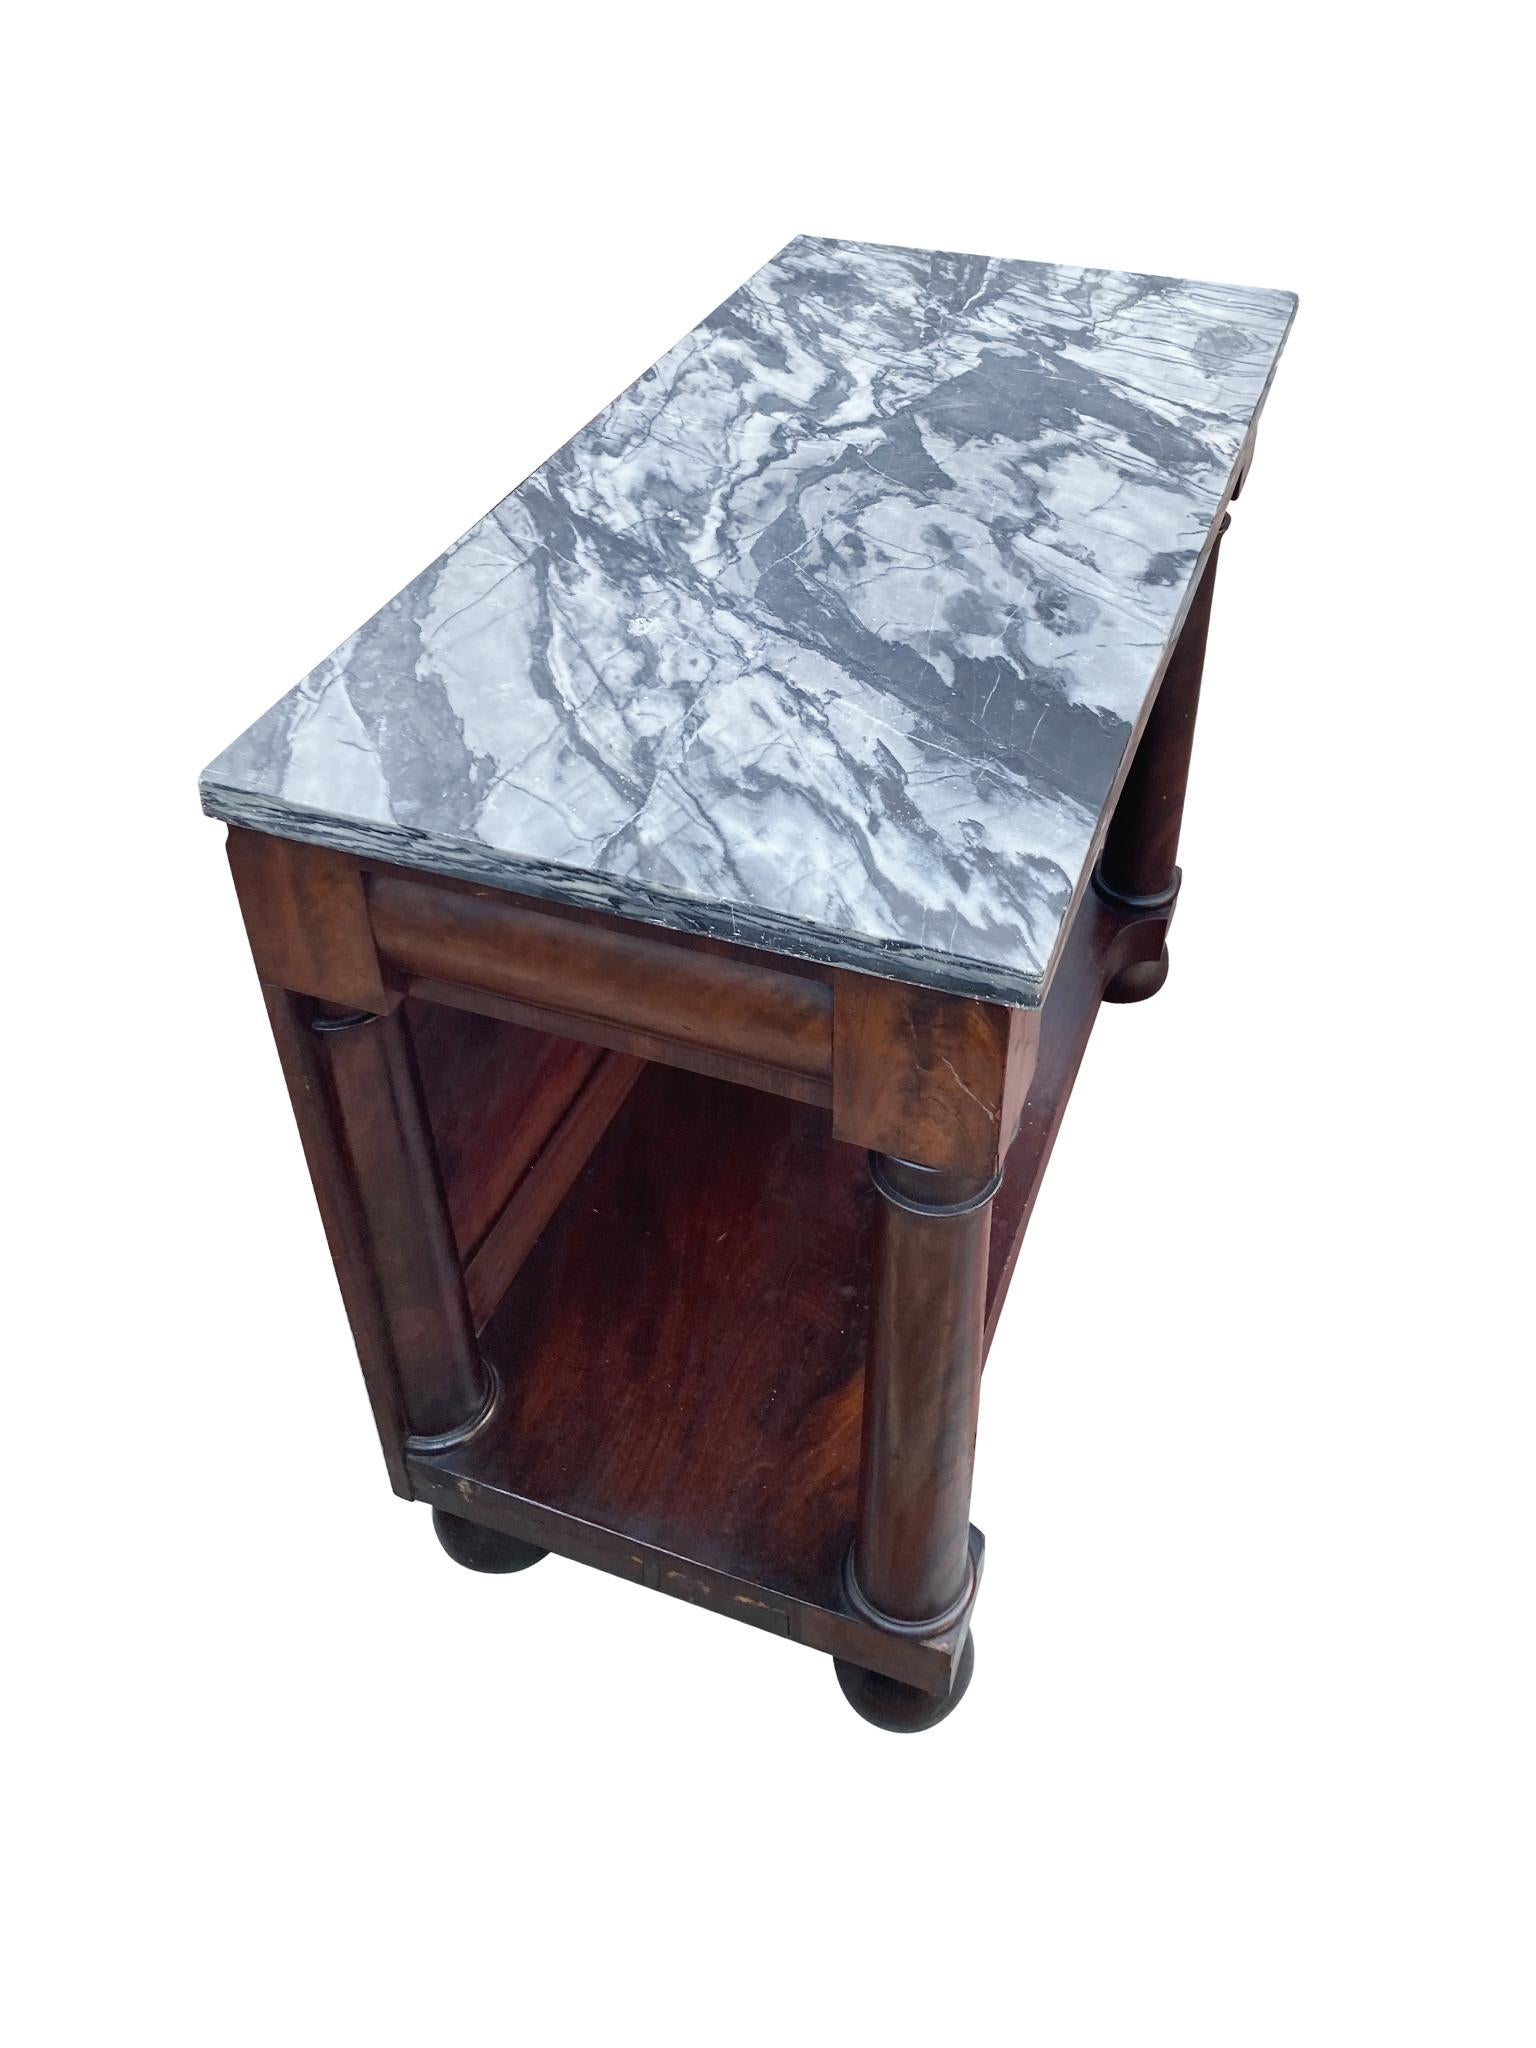 Early 19th Century Federal Marble-Top Pier Table 1